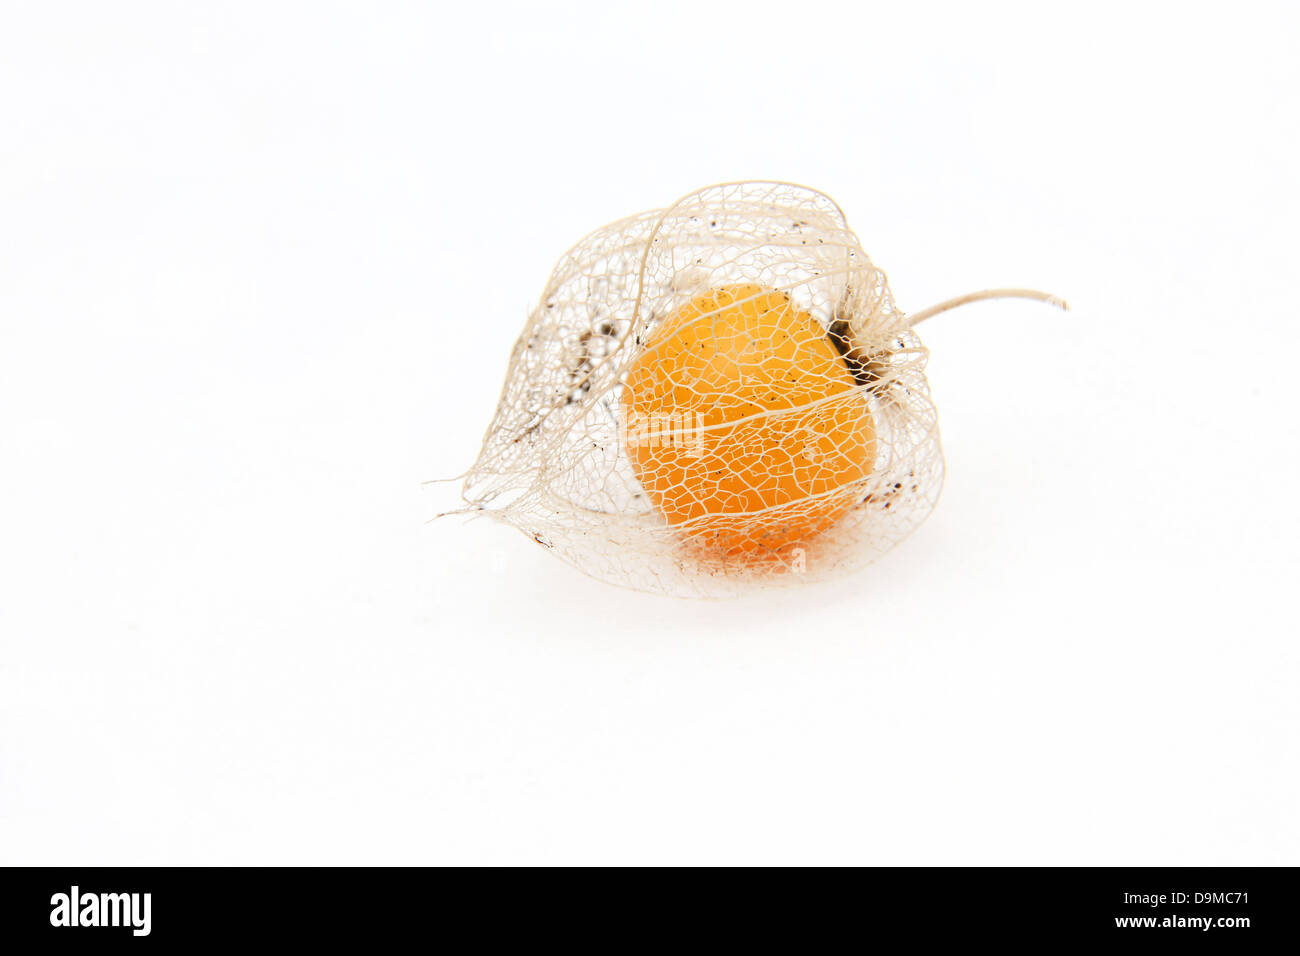 A Ripe Cape Gooseberry (Physalis Peruviana) In Calyx From The Nightshade Family Stock Photo